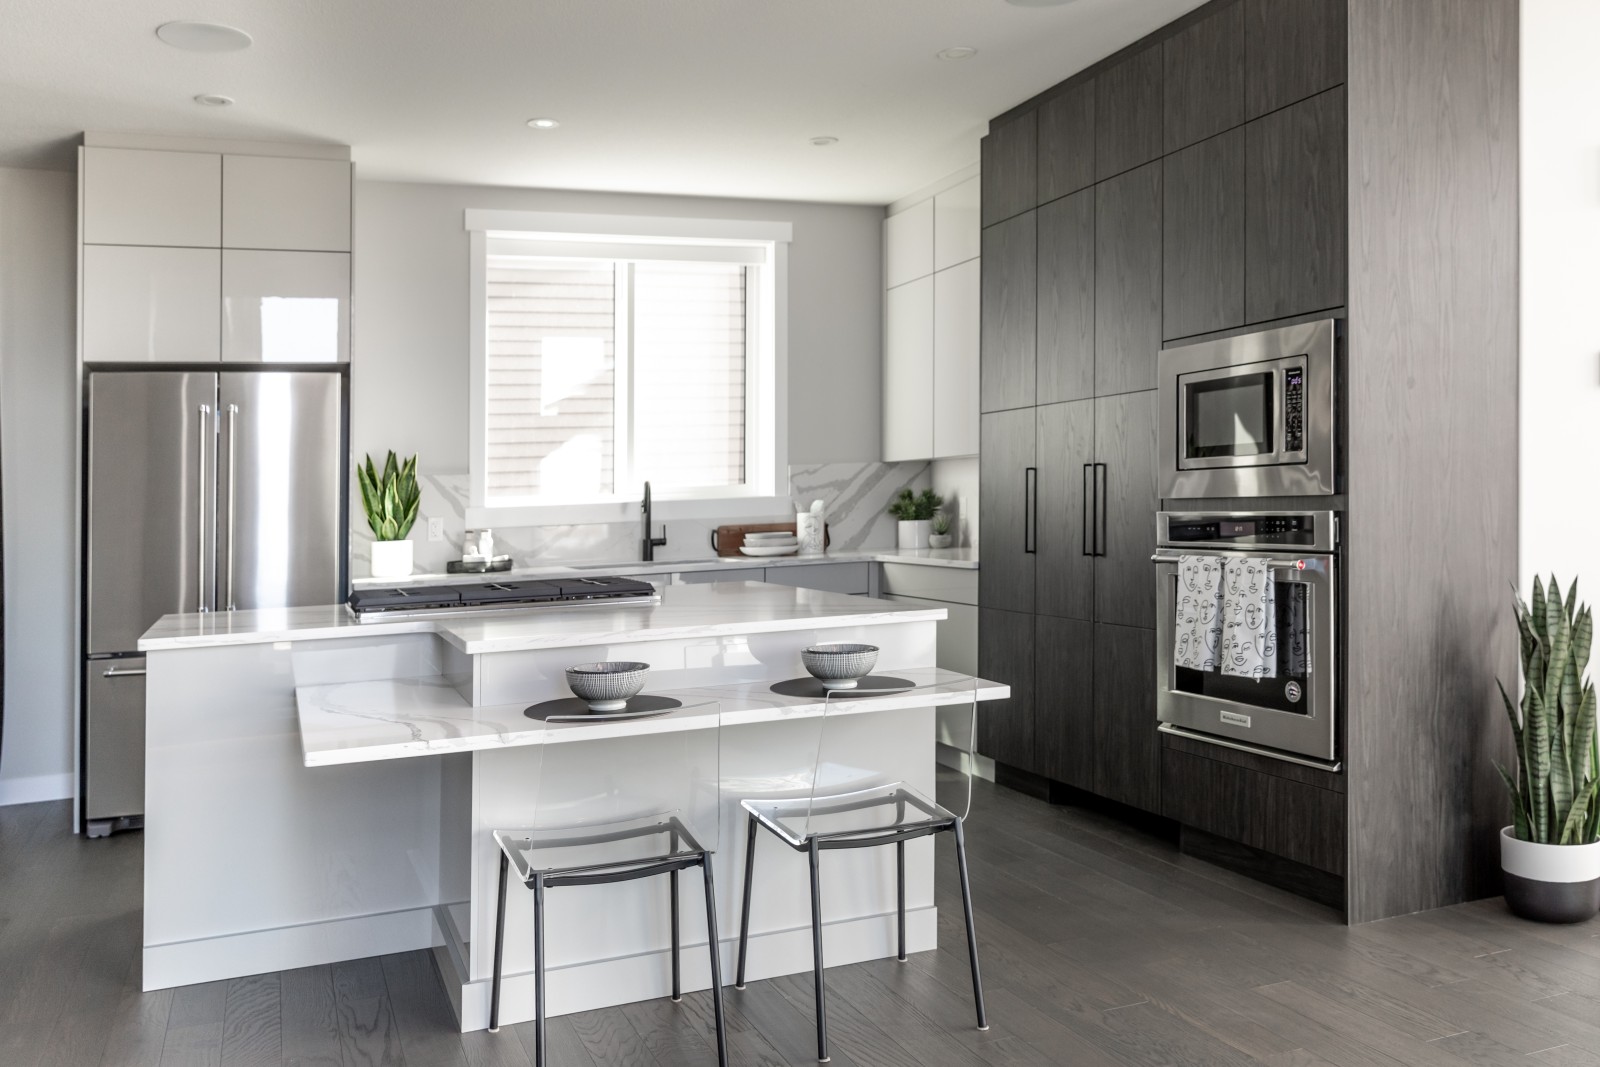 The sleek and modern two-toned, grey acrylic and dark sleek wood kitchen of the Cyrus showhome